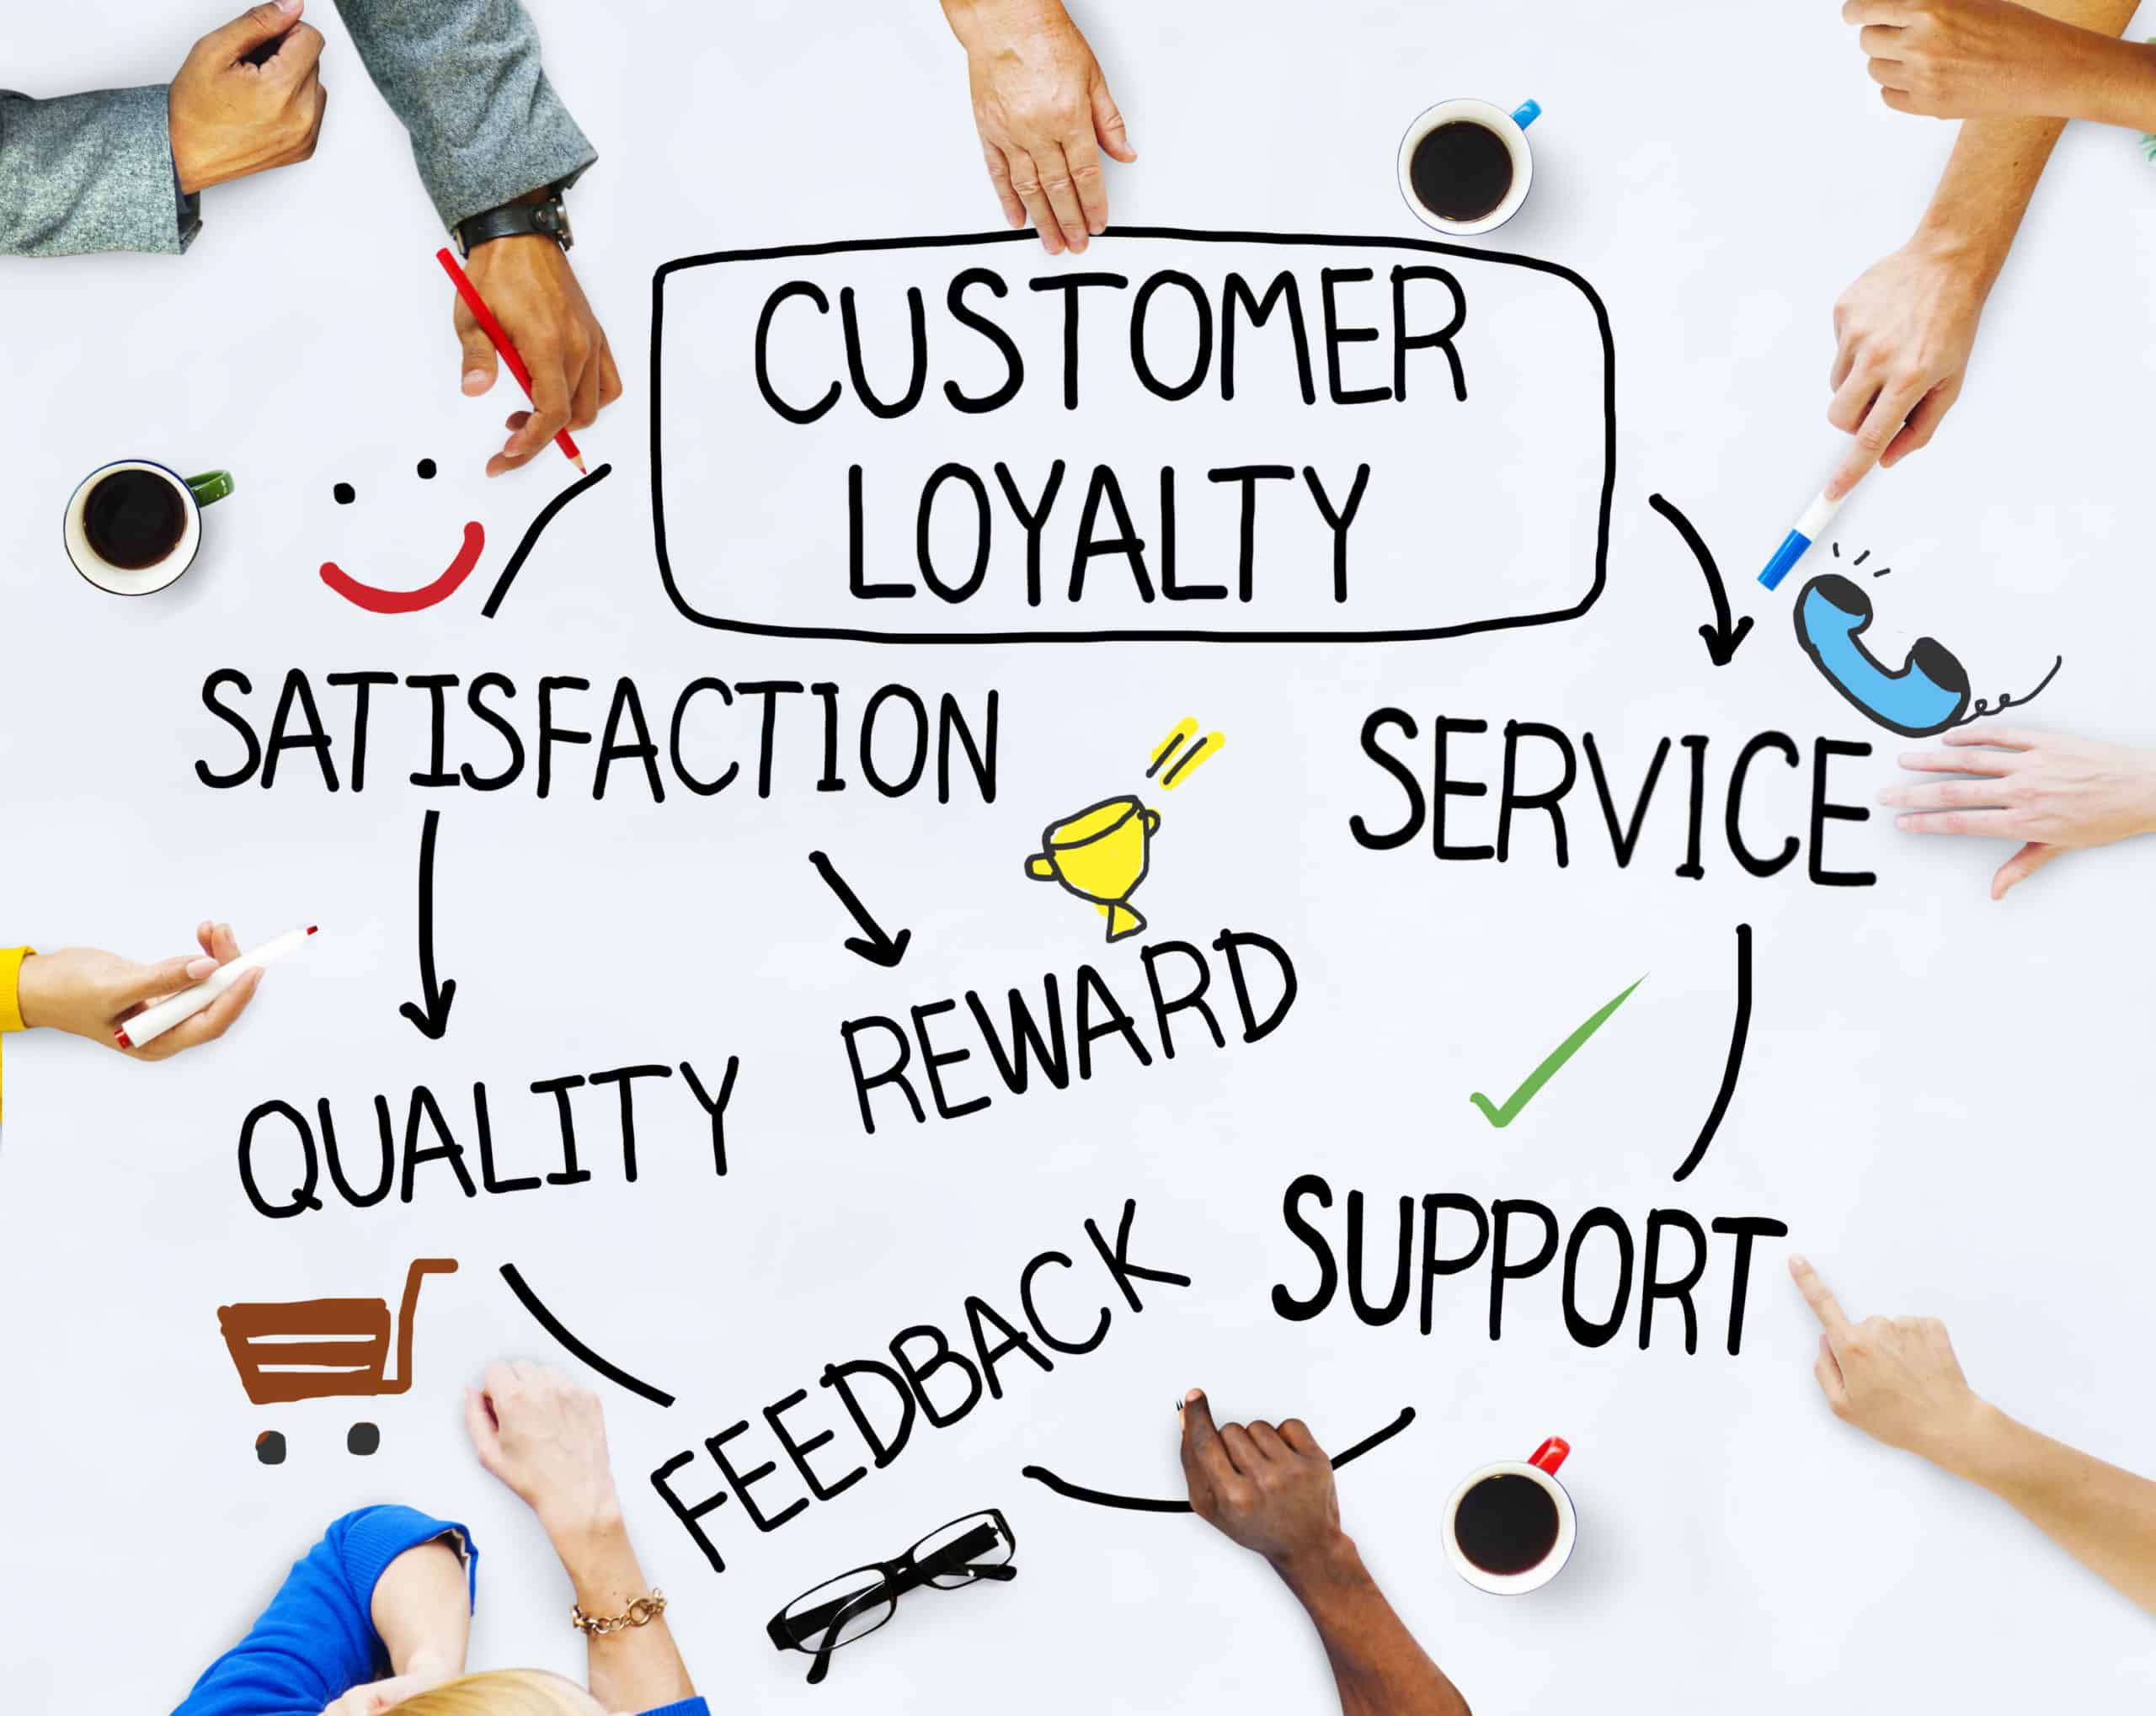 Building Loyal Customers and Getting Referrals for Your Contracting Business